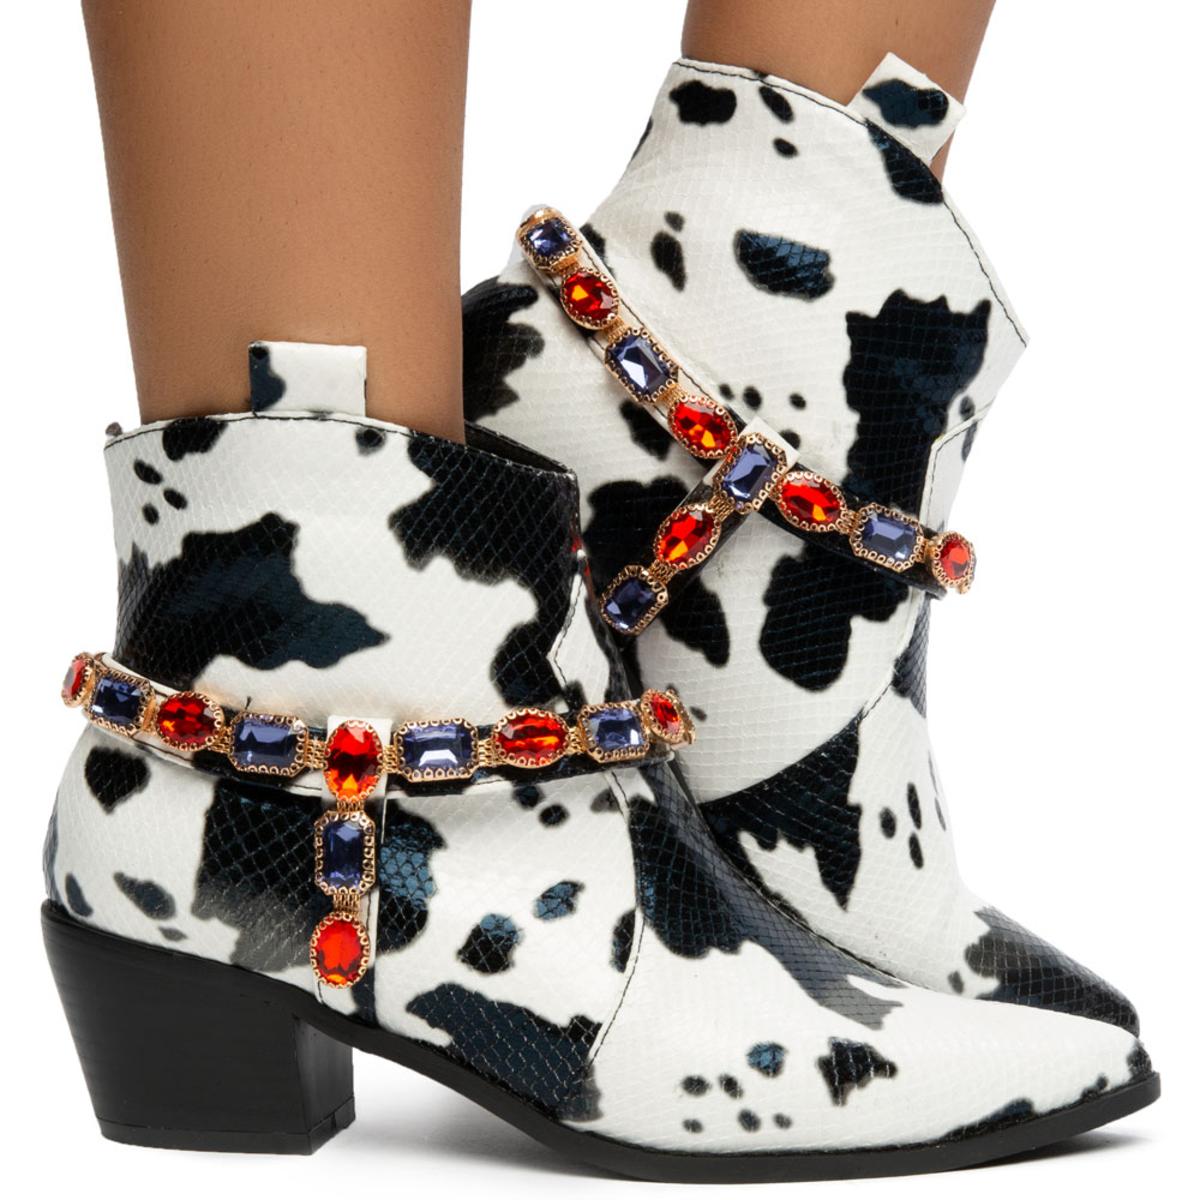 Kaly-1 Cow Print and Gems Boots